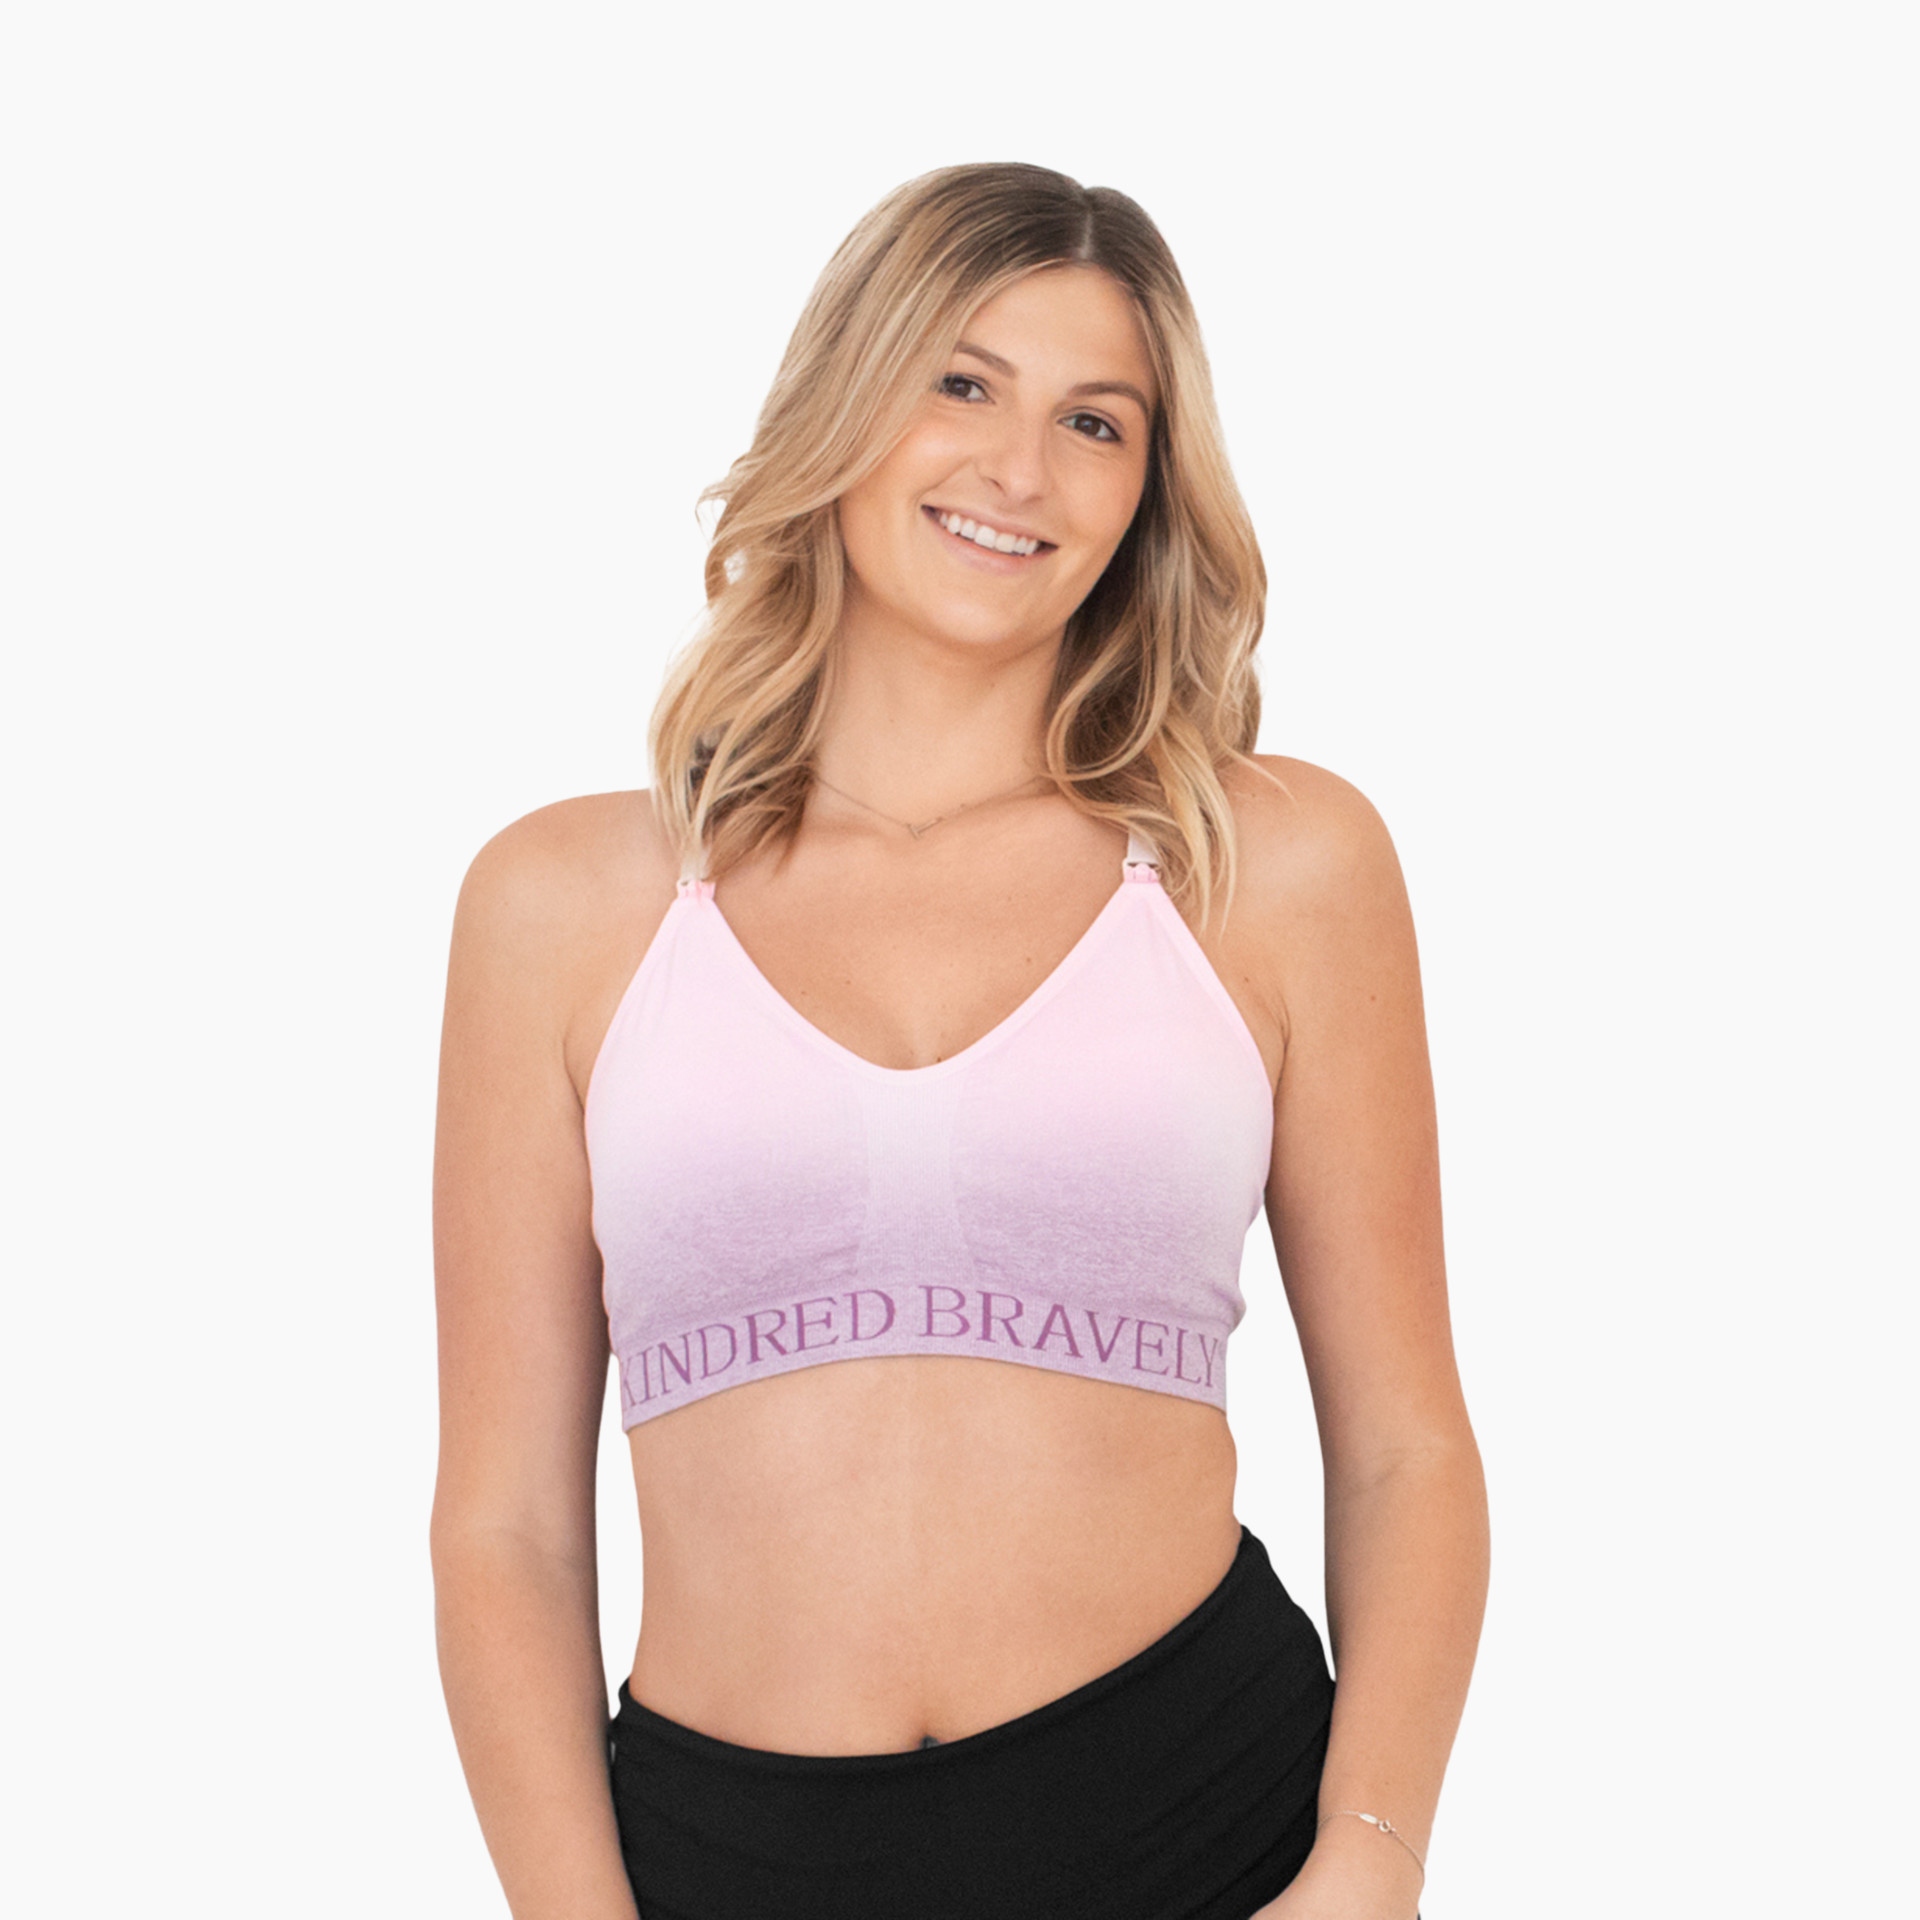 Kindred Bravely Sublime Hands-Free Pumping & Nursing Sports Bra - Ombre  Purple, Small